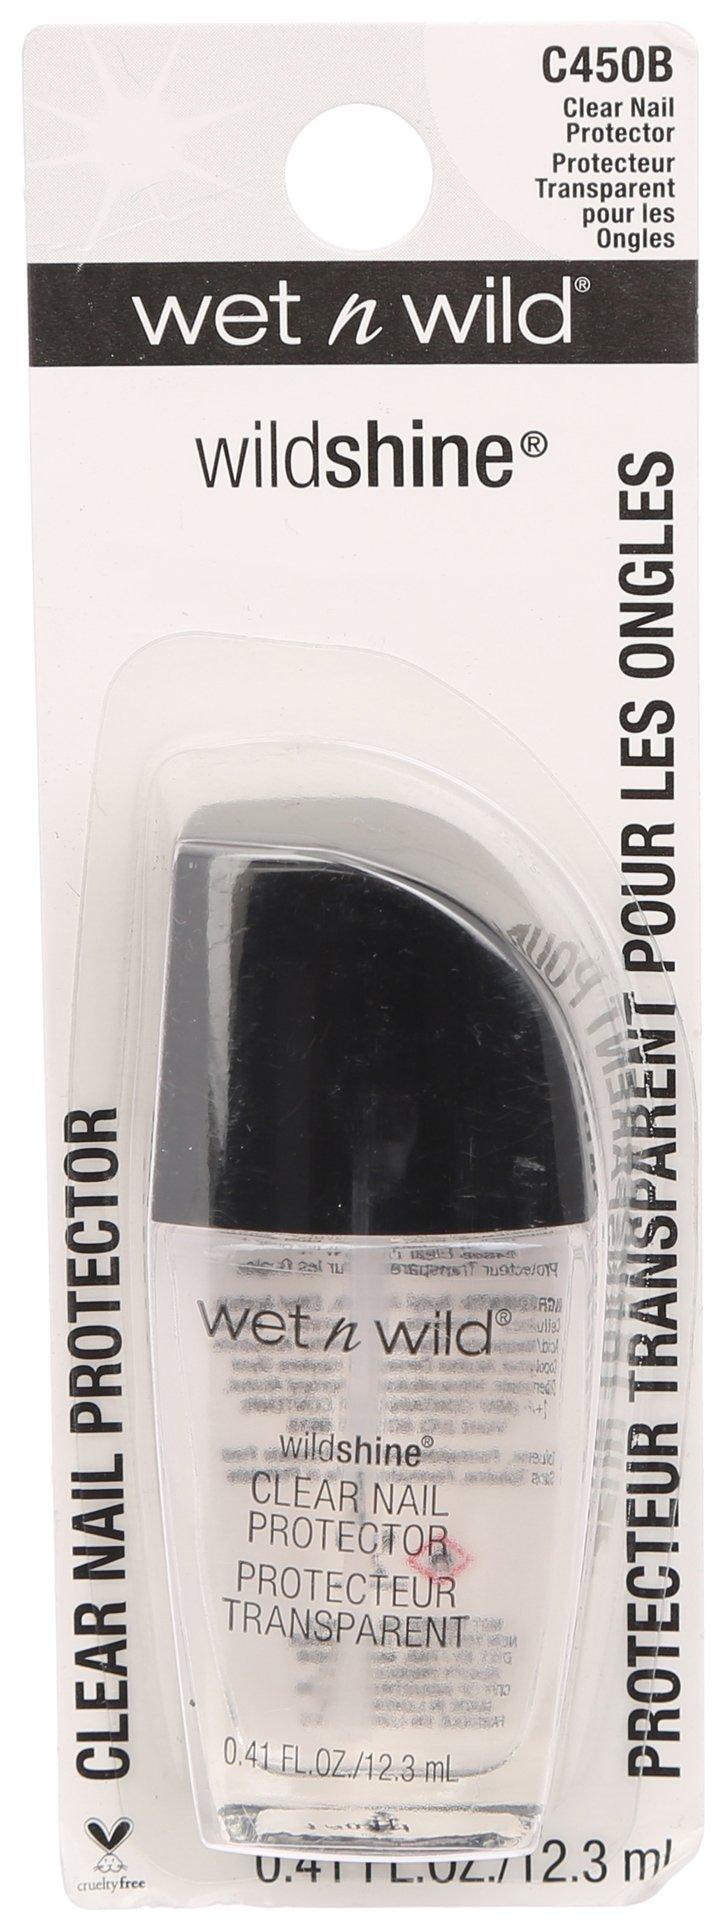 Wildshine Clear Nail Protector